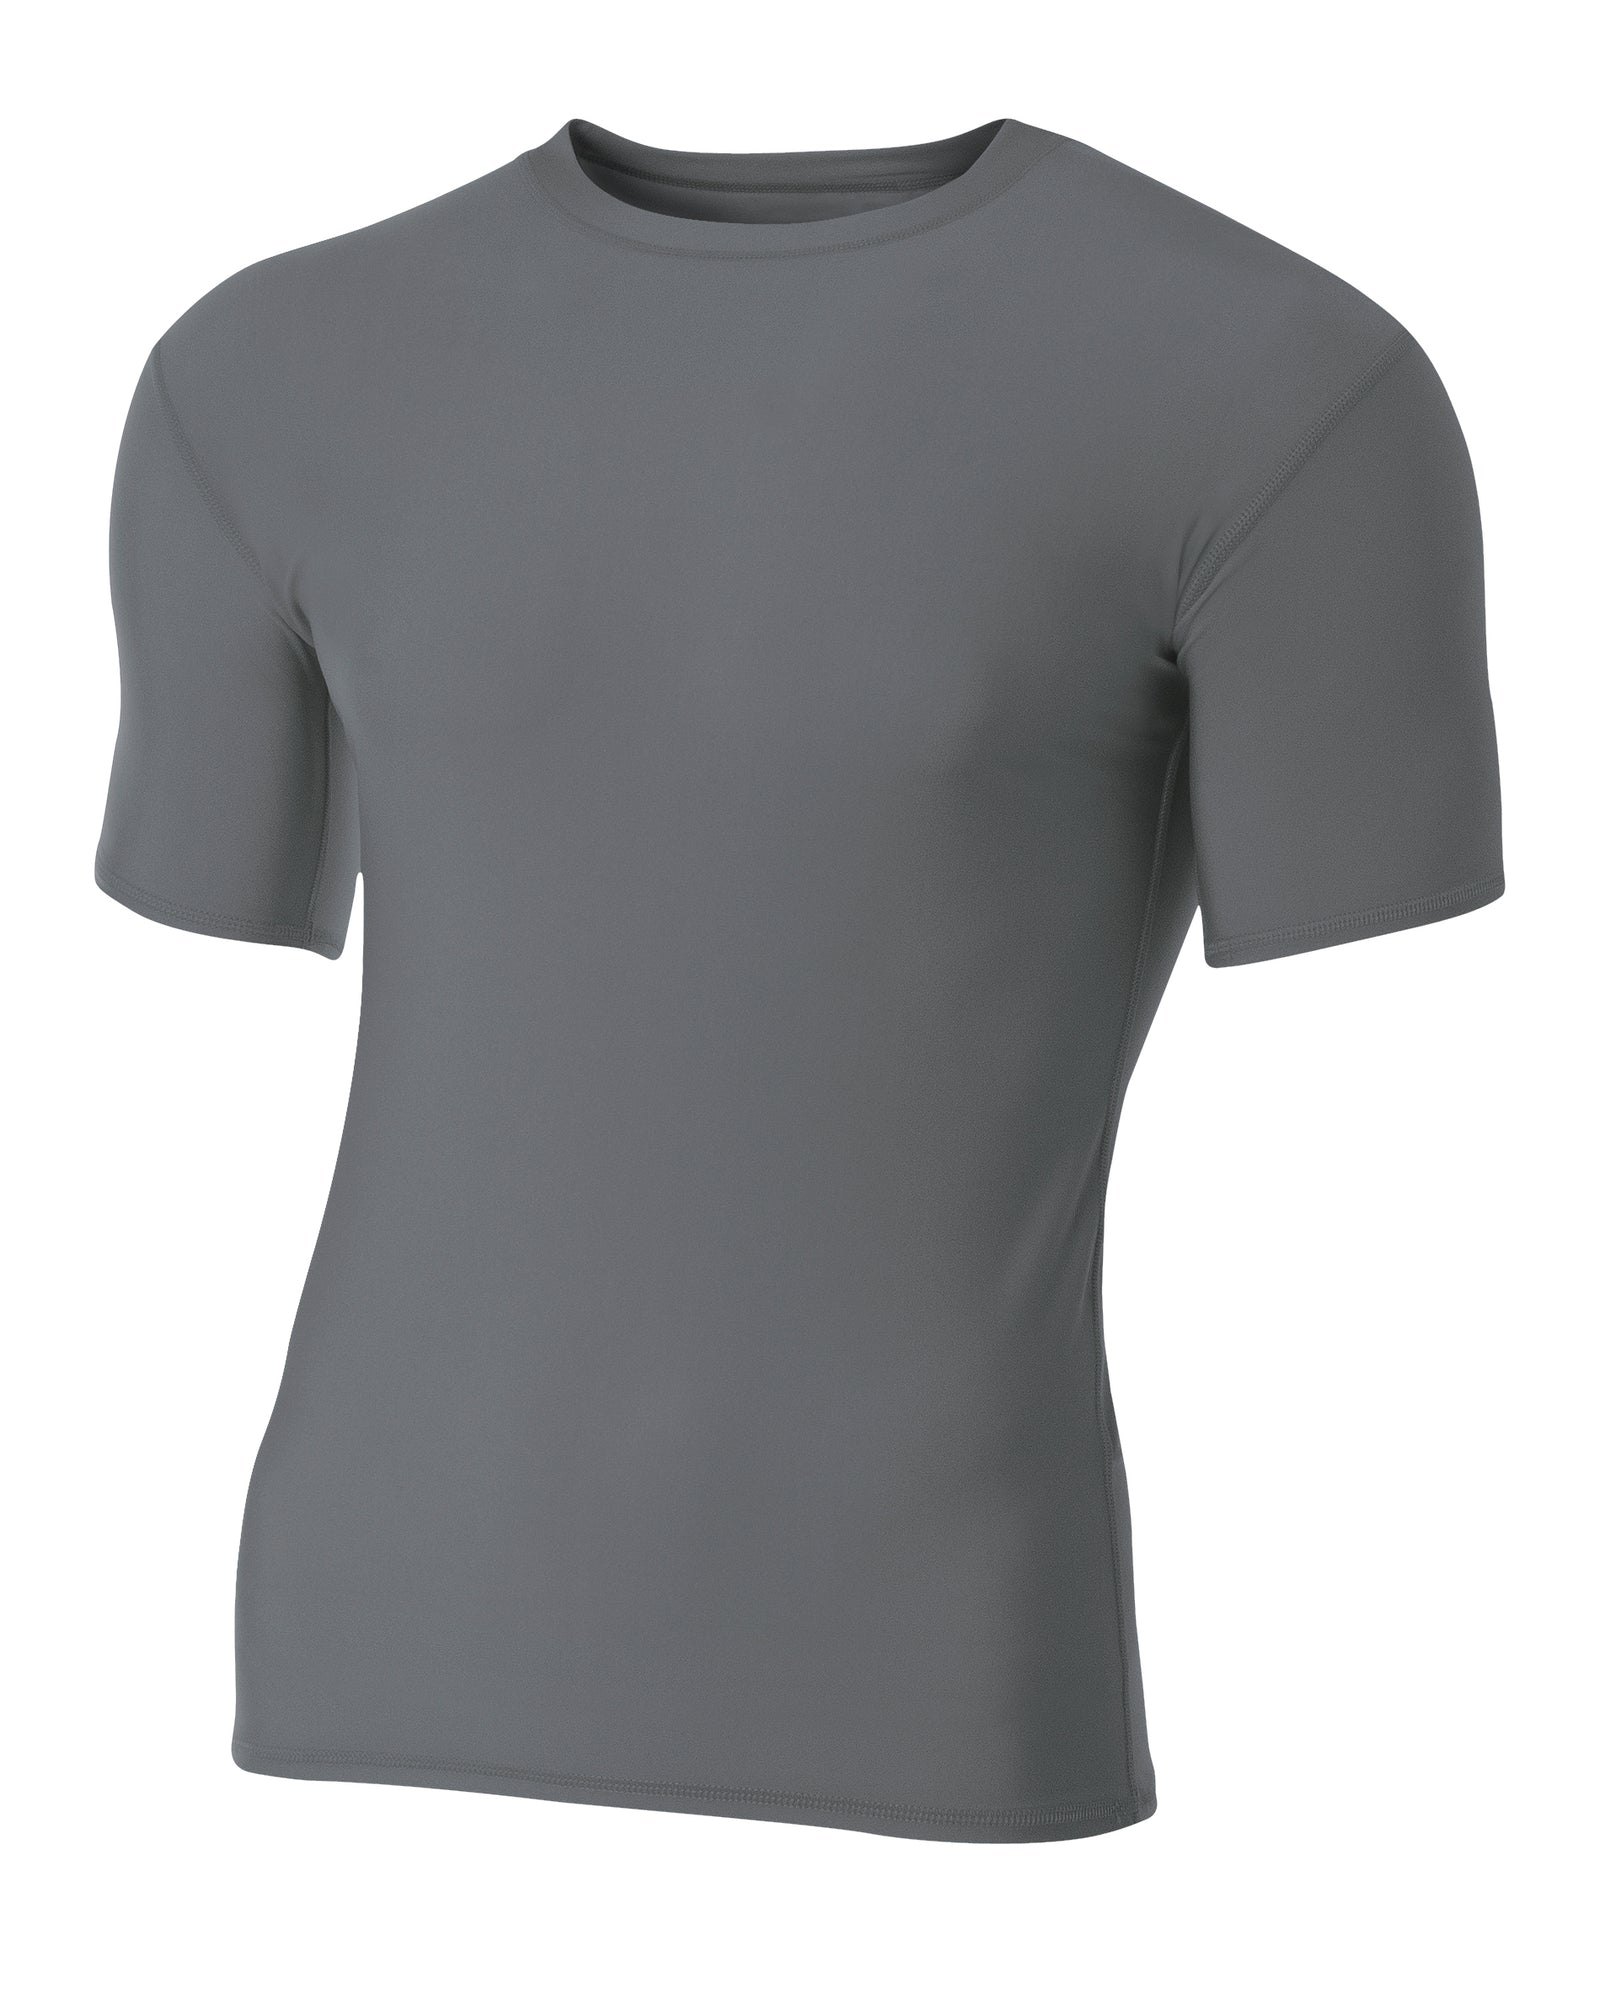 Graphite A4 A4 Youth Short Sleeve Compression Crew